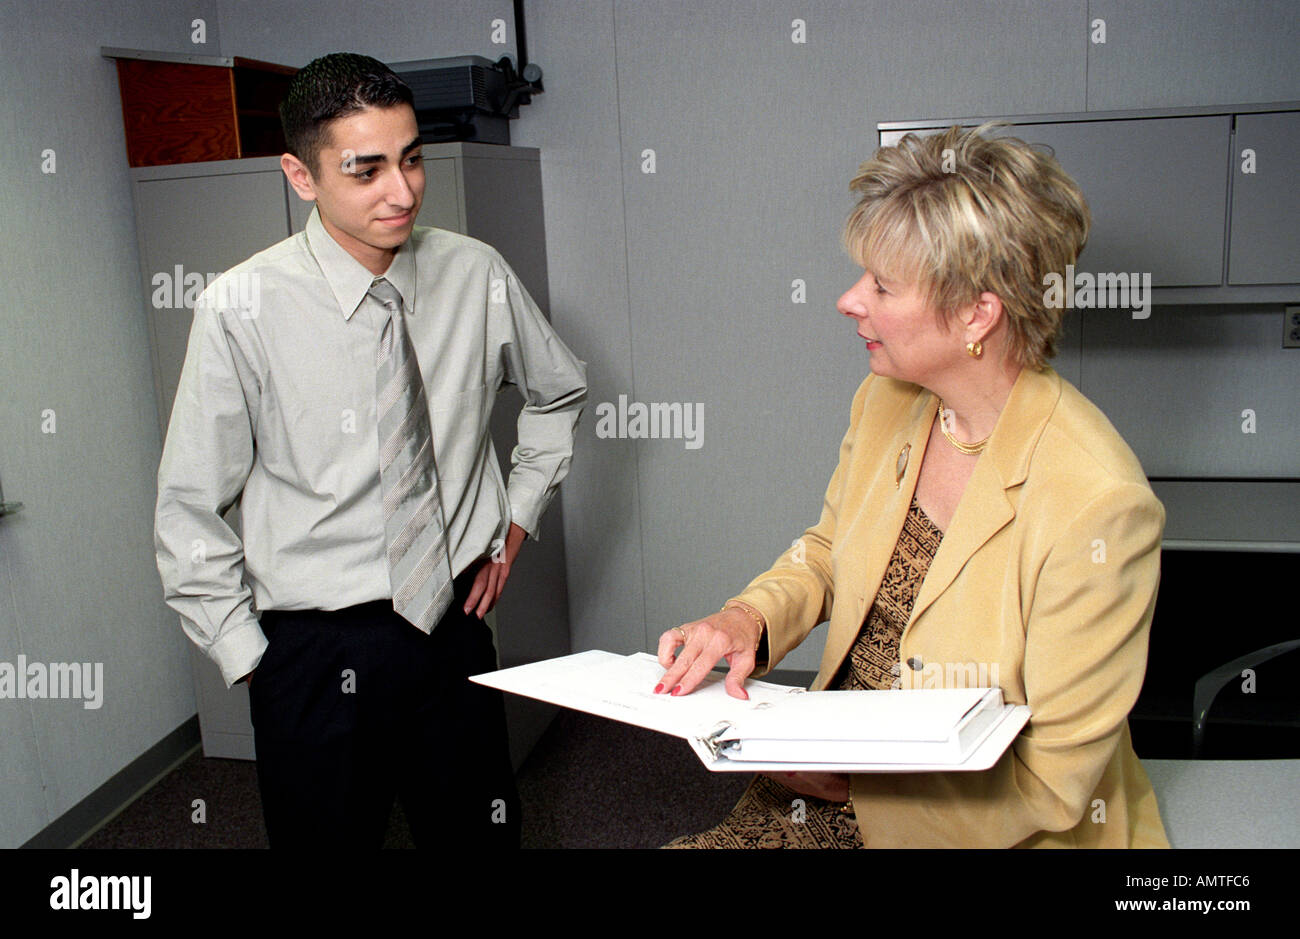 Professional female interviewer converses with ethnic job applicant Stock Photo